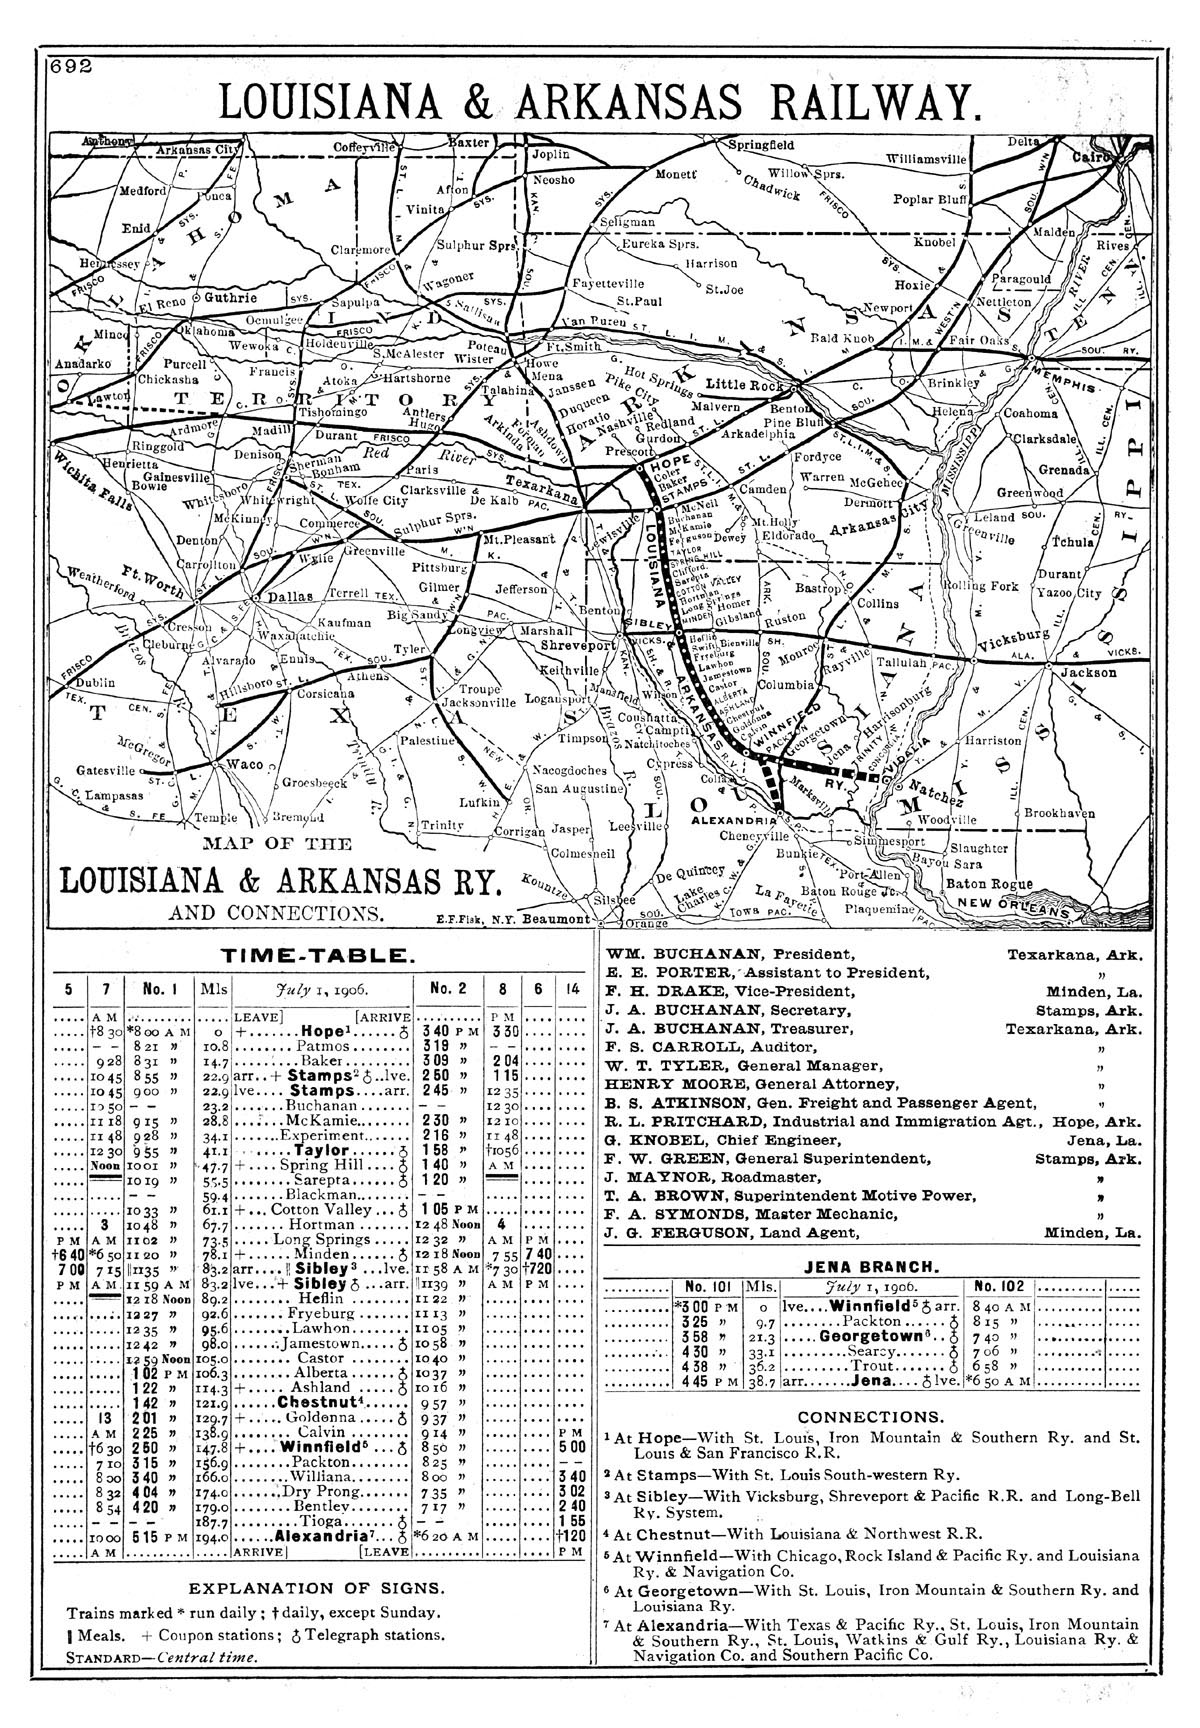 Louisiana & Arkansas Railway Company (Ark., La., Miss.), Public Timetable and Map Showing Route in 1906.